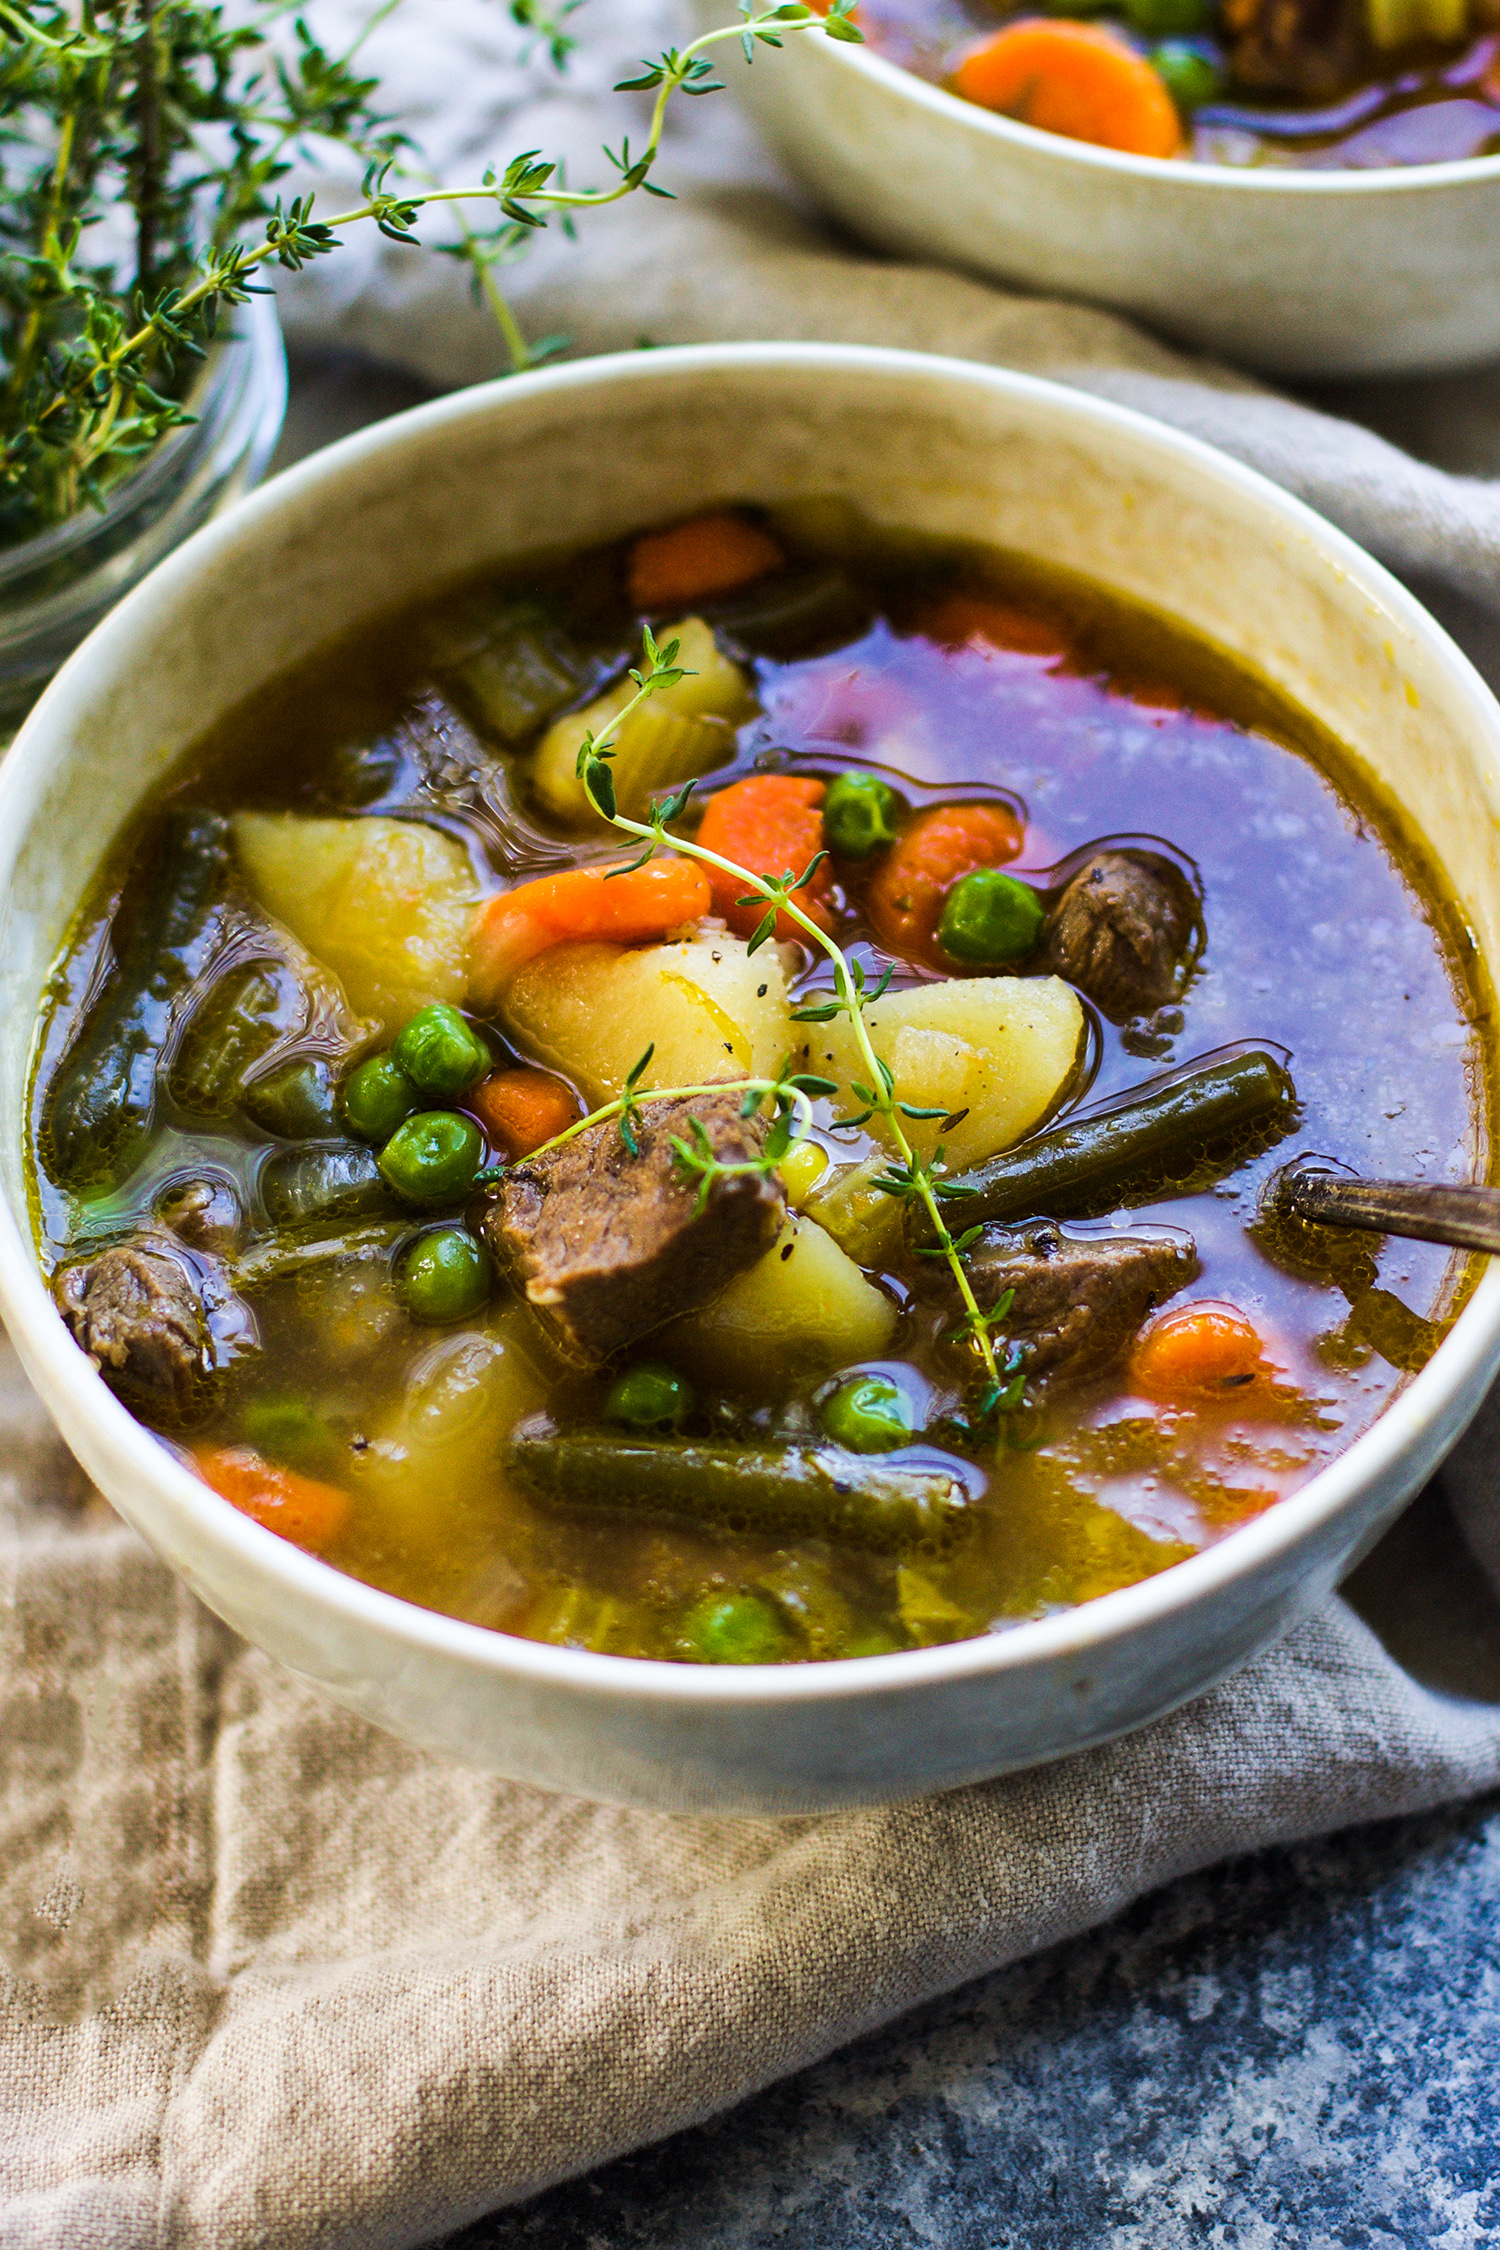 365 Days of Baking & More - Classic Vegetable Beef Soup ❤